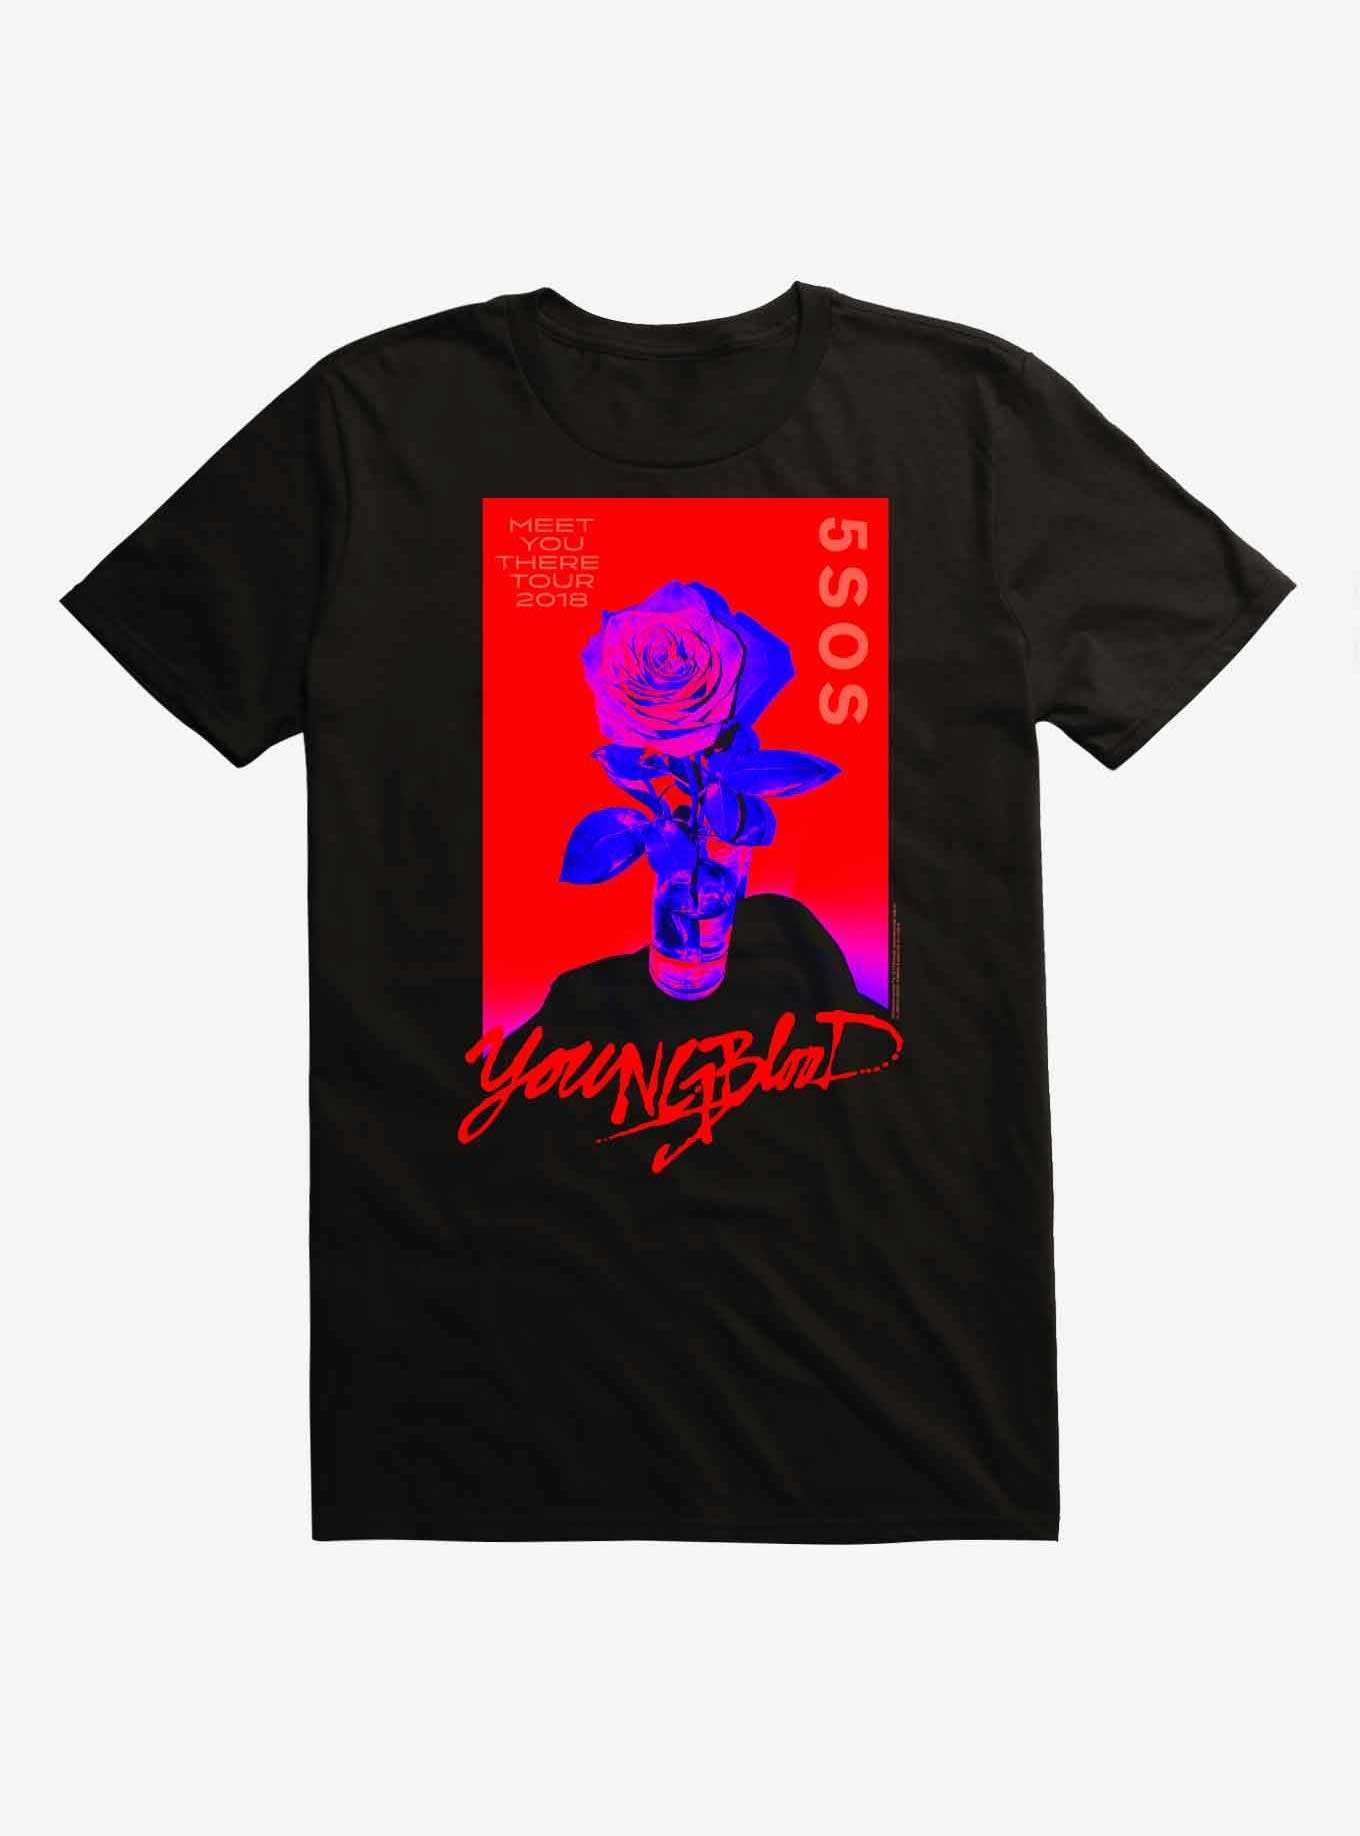 5 Seconds Of Sumer Meet You There Tour 2018 T-Shirt, , hi-res